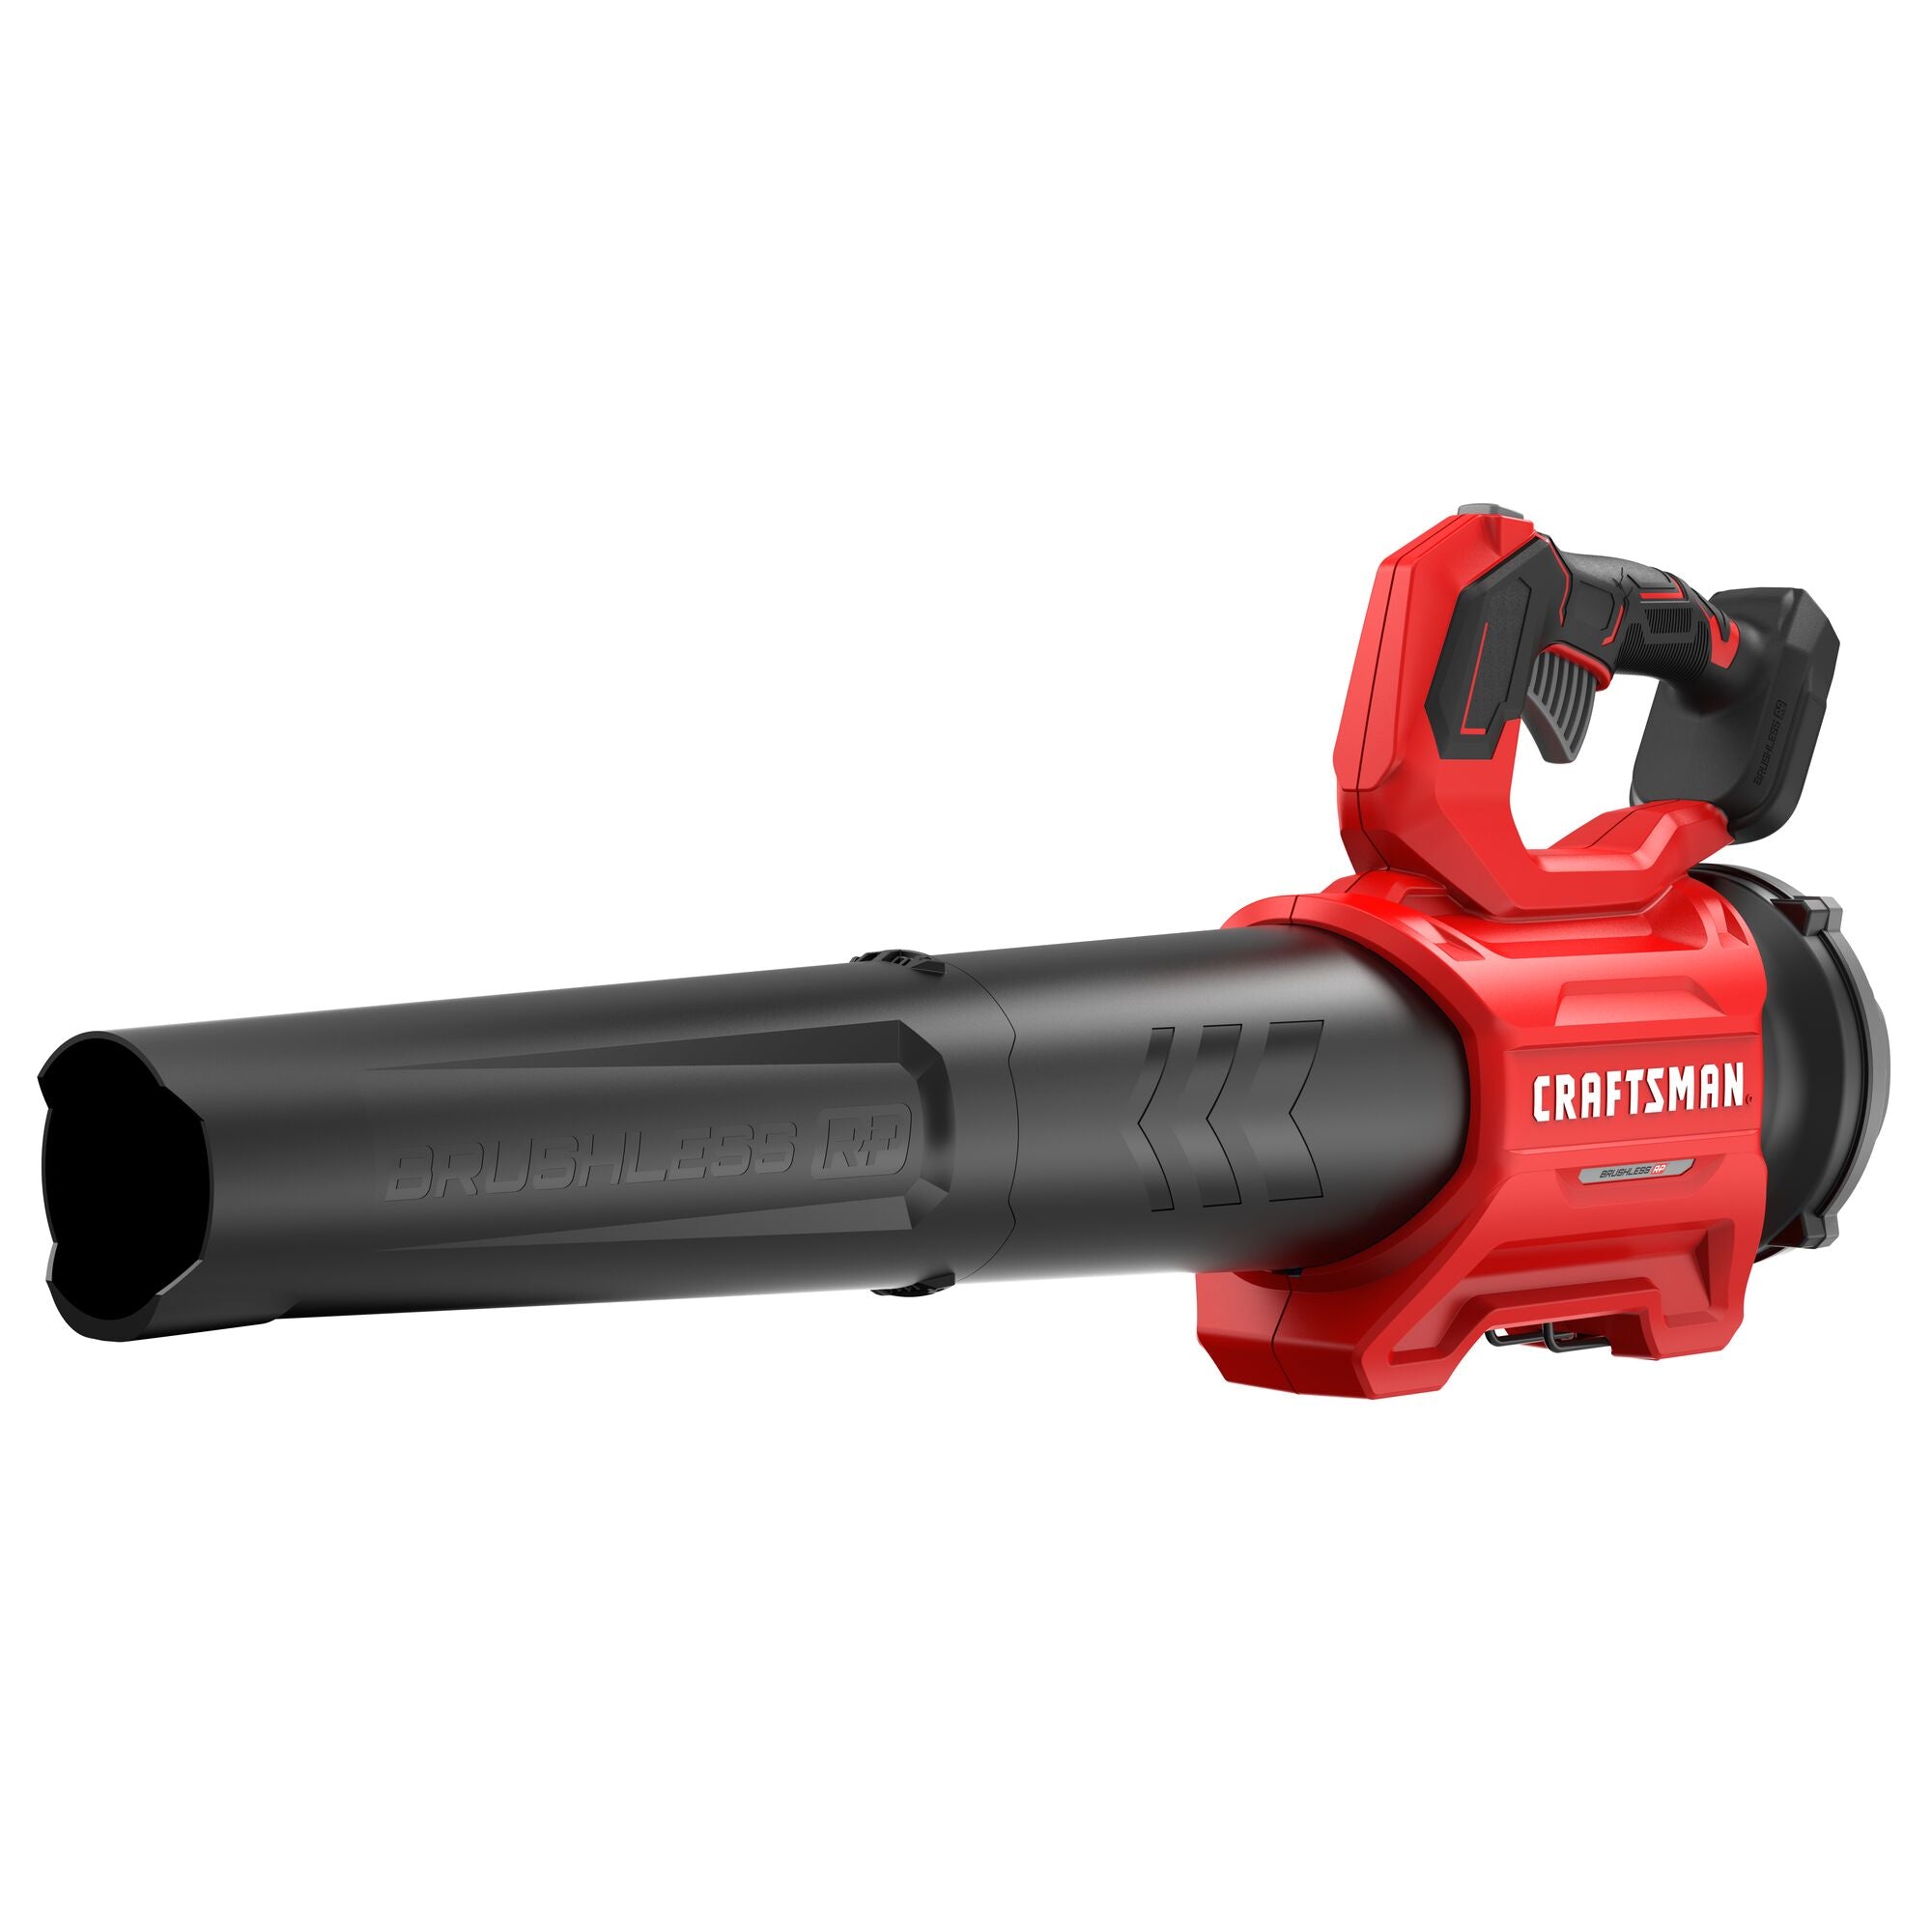 V20* BRUSHLESSRP Cordless Axial  Blower Bare Tool Left Angle 